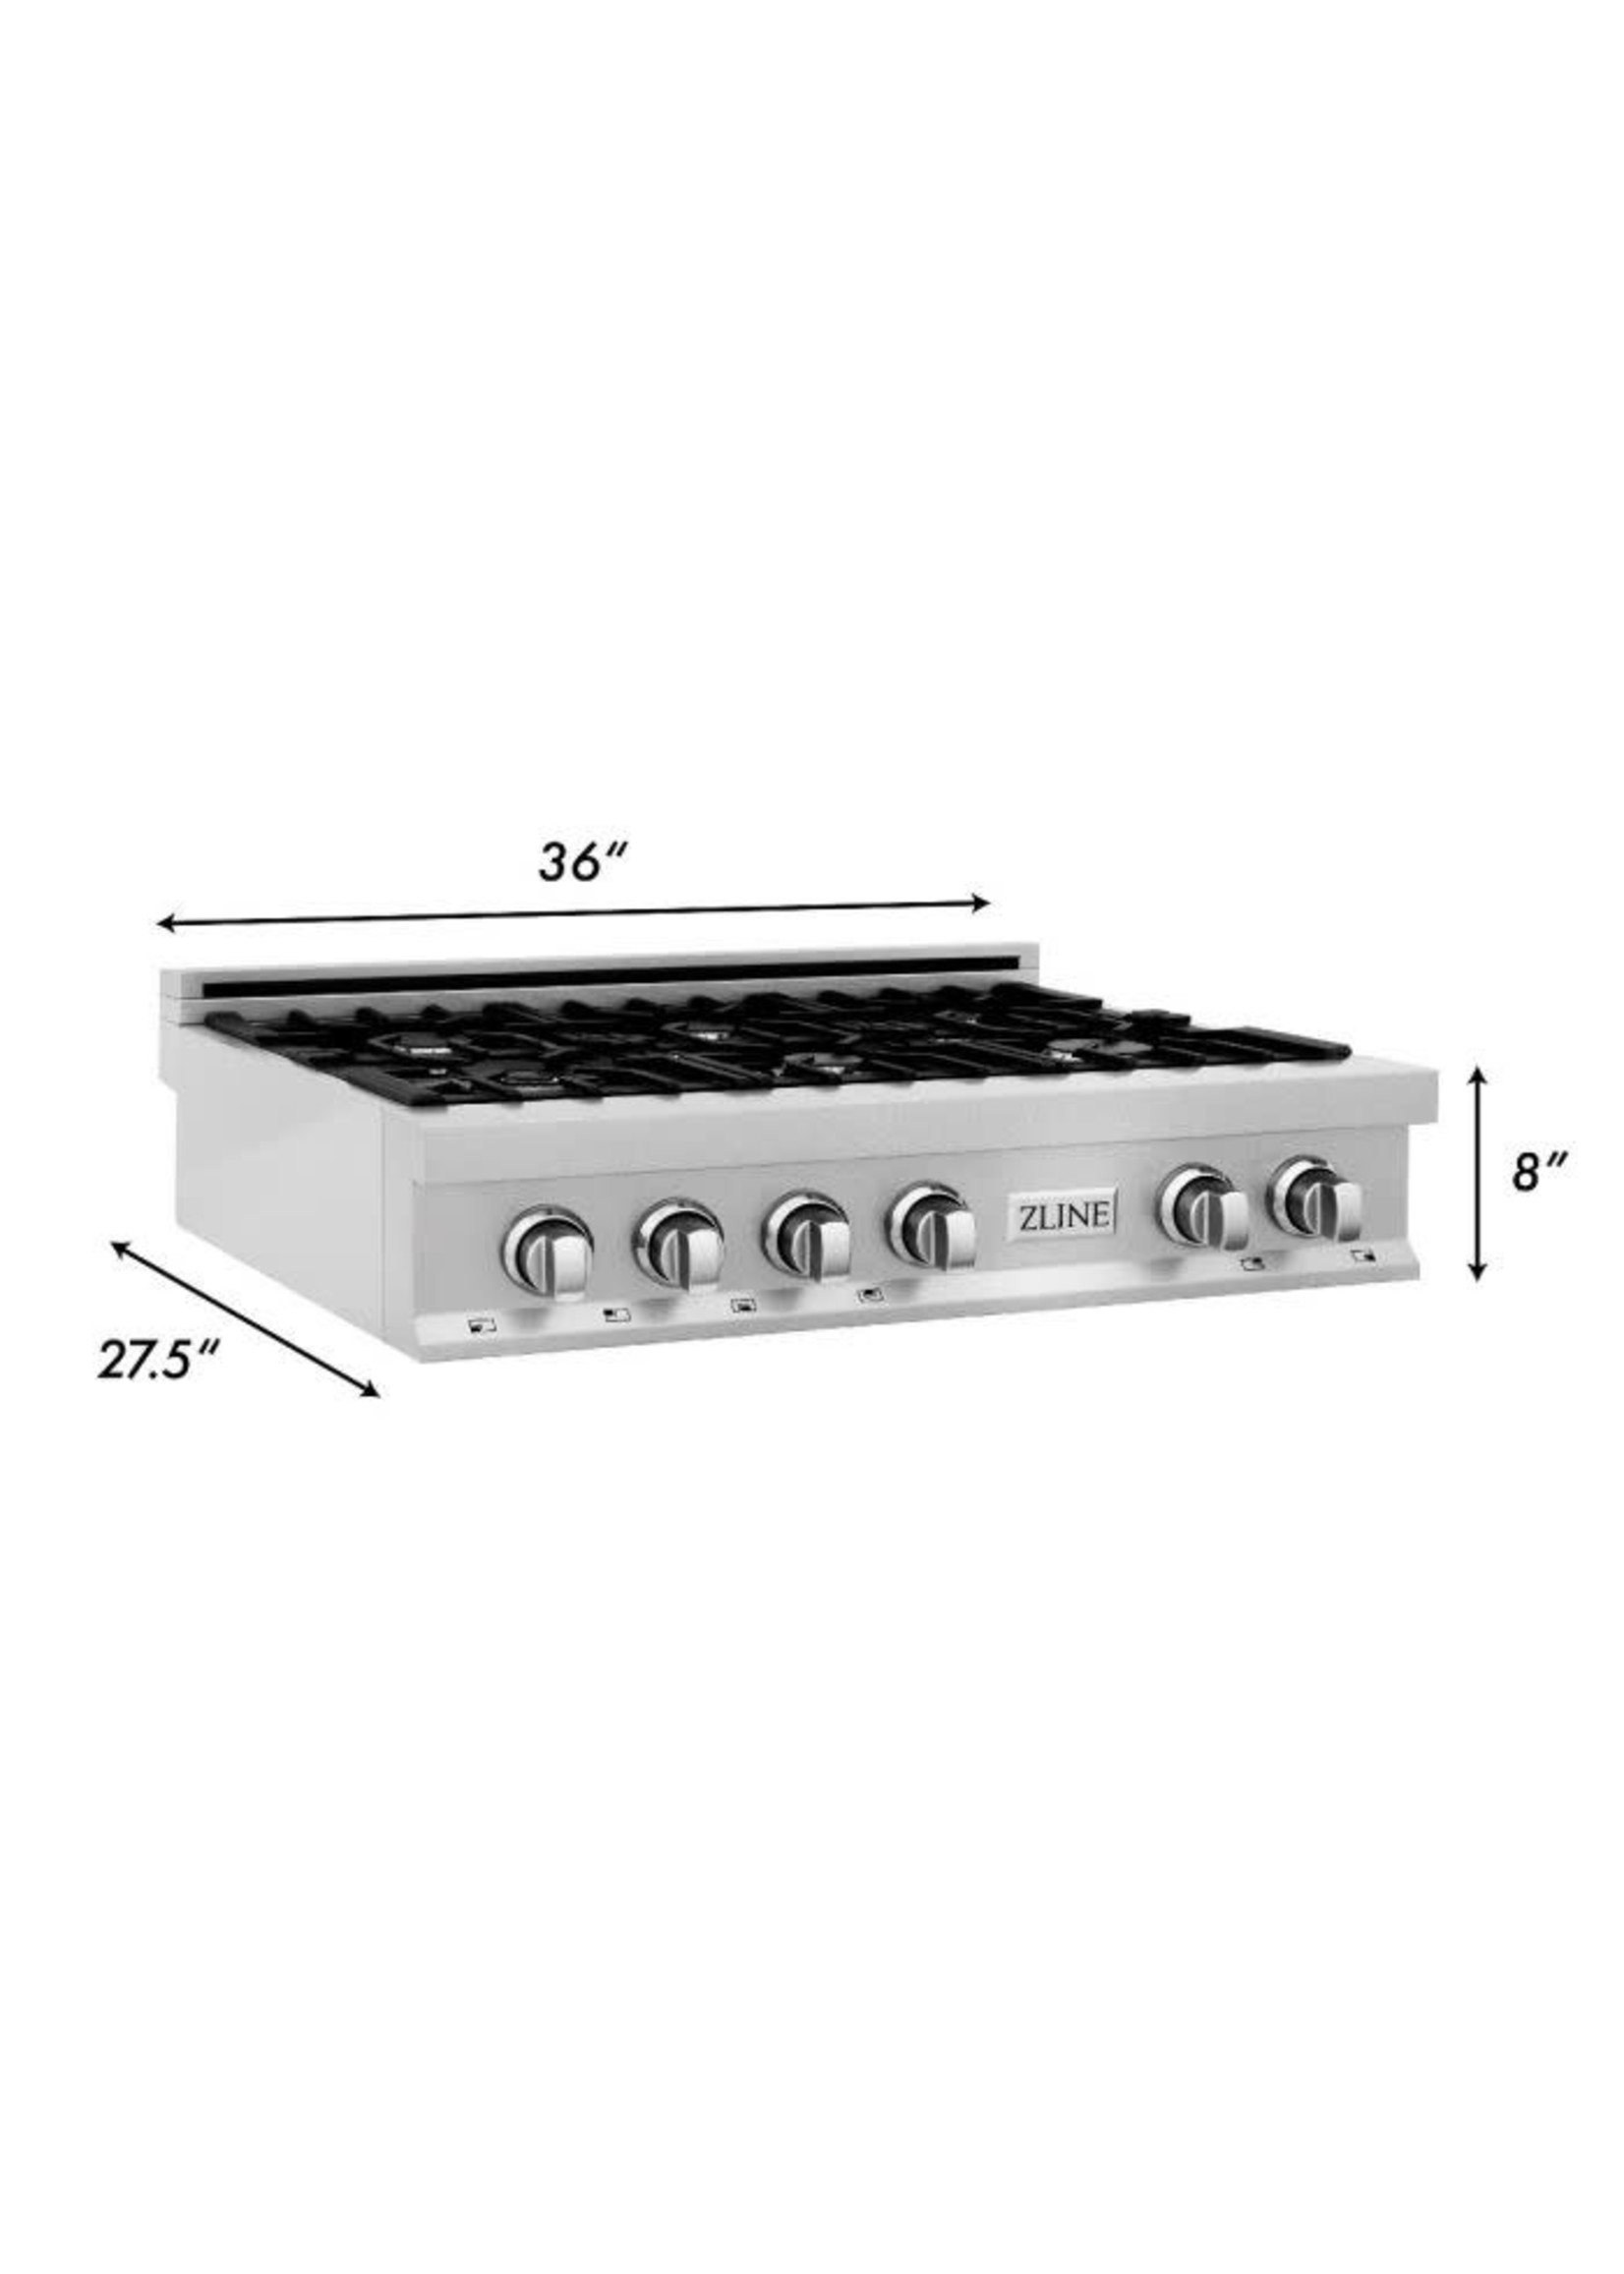 ZLINE ZLINE 36" Porcelain Gas Stovetop in DuraSnow® Stainless Steel with 6 Gas Burners